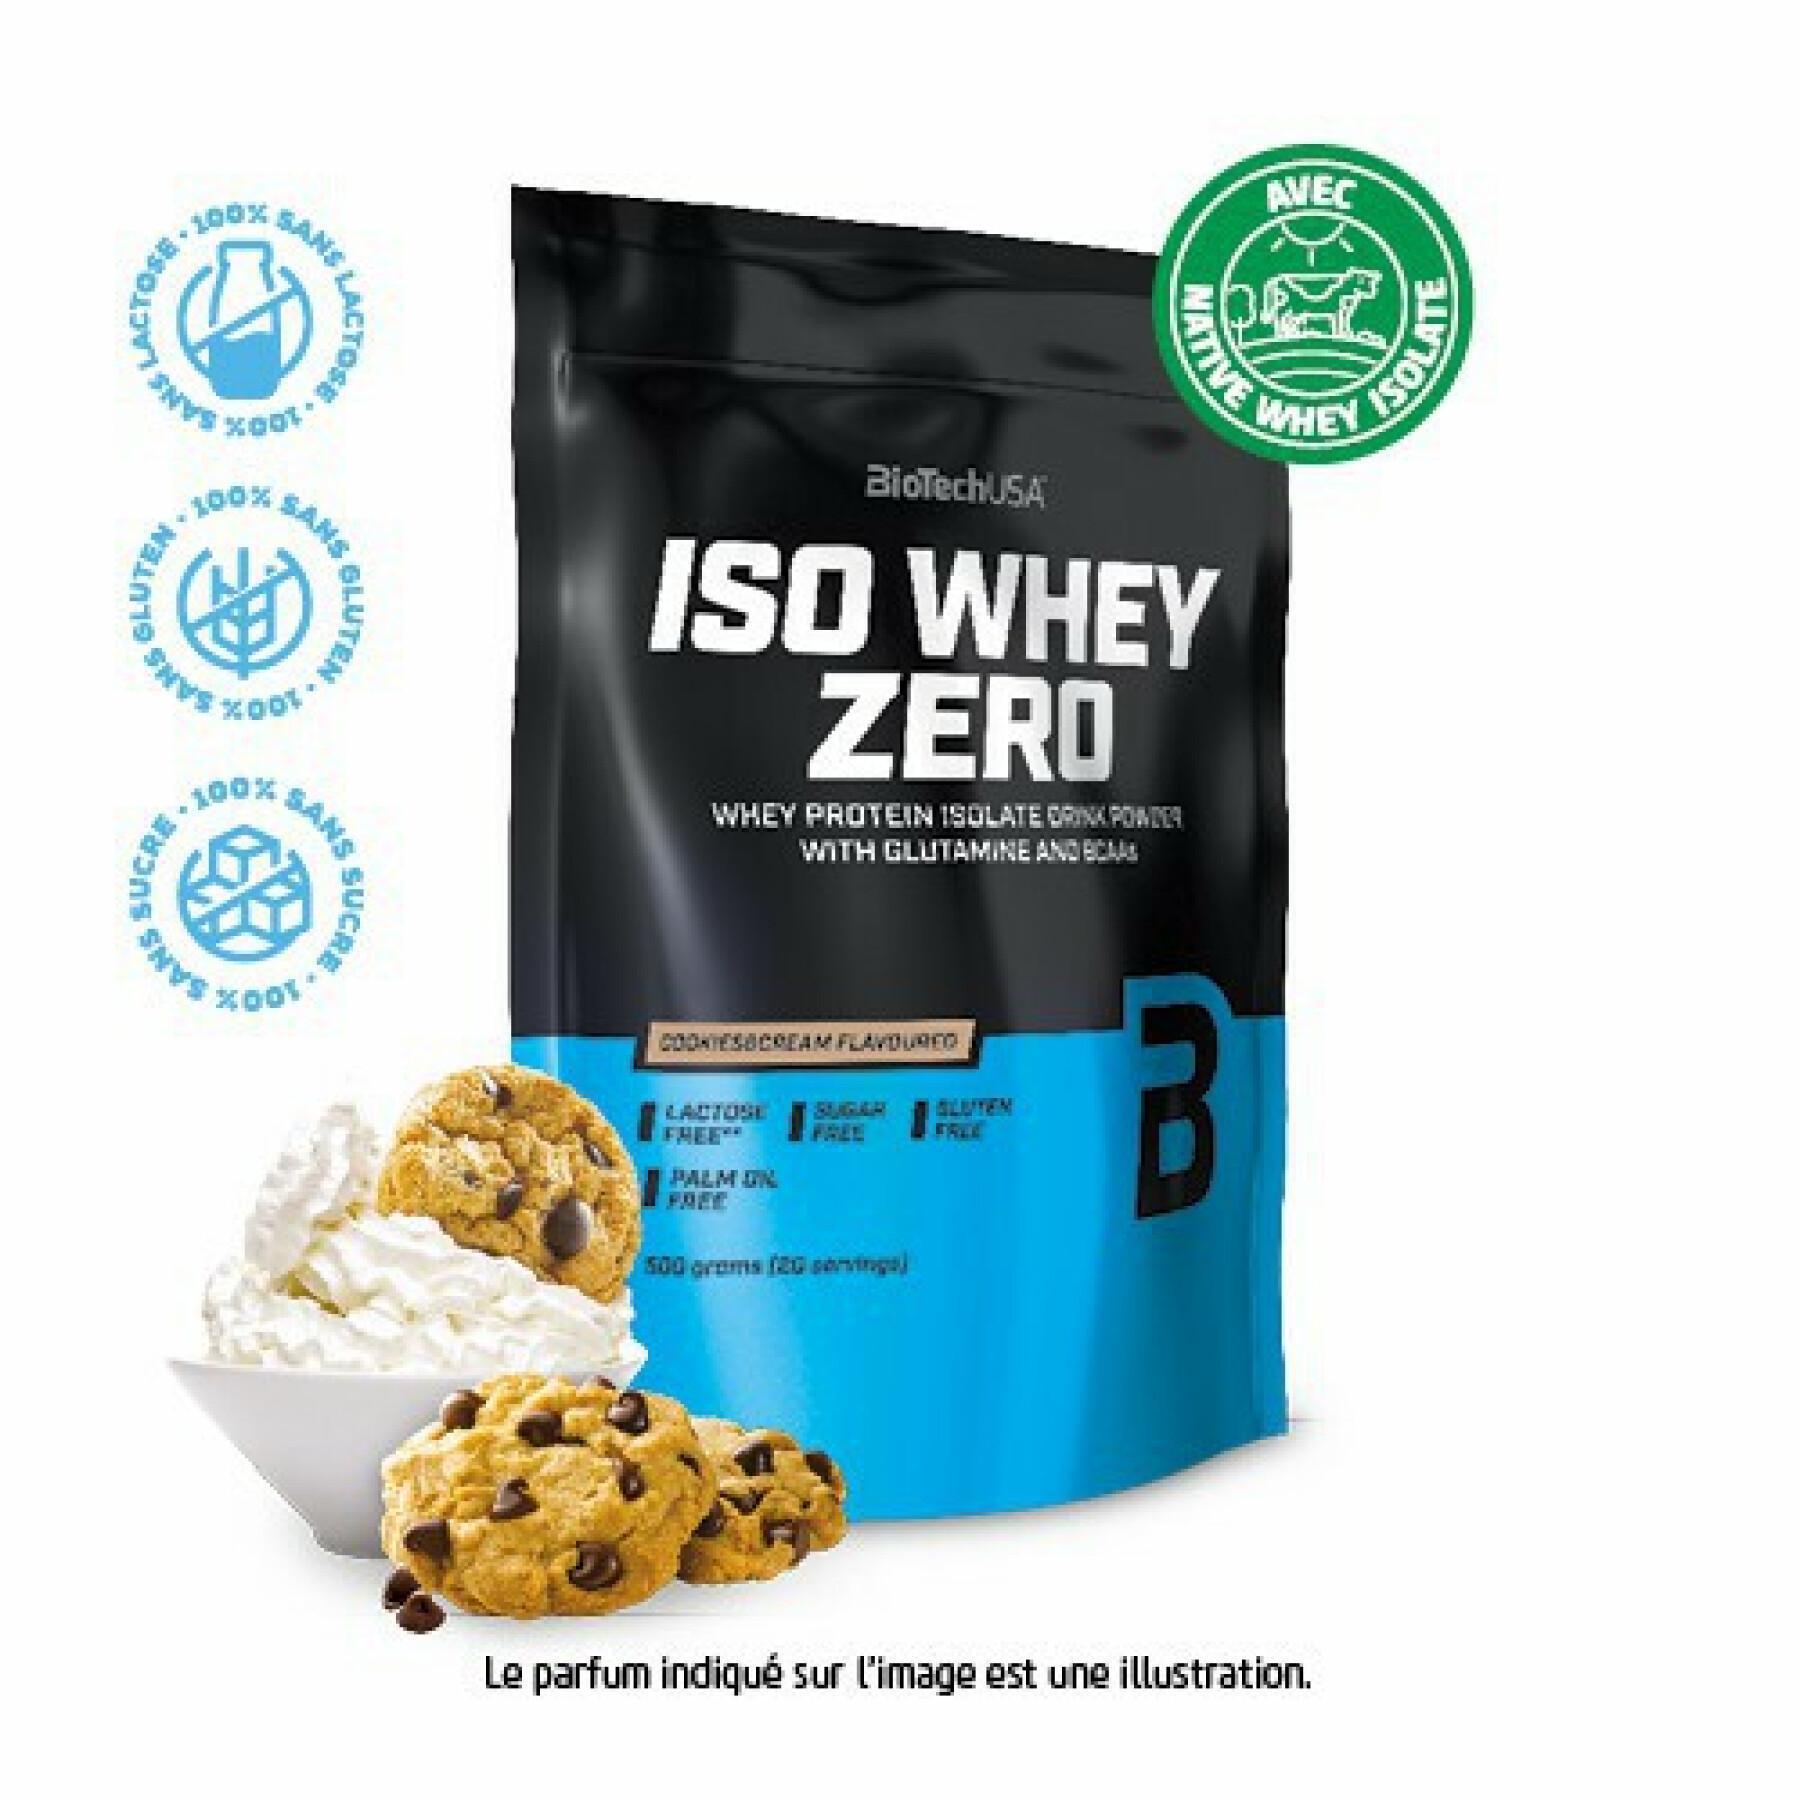 Pack of 10 bags of protein Biotech USA iso whey zero lactose free - Cookies & cream - 500g